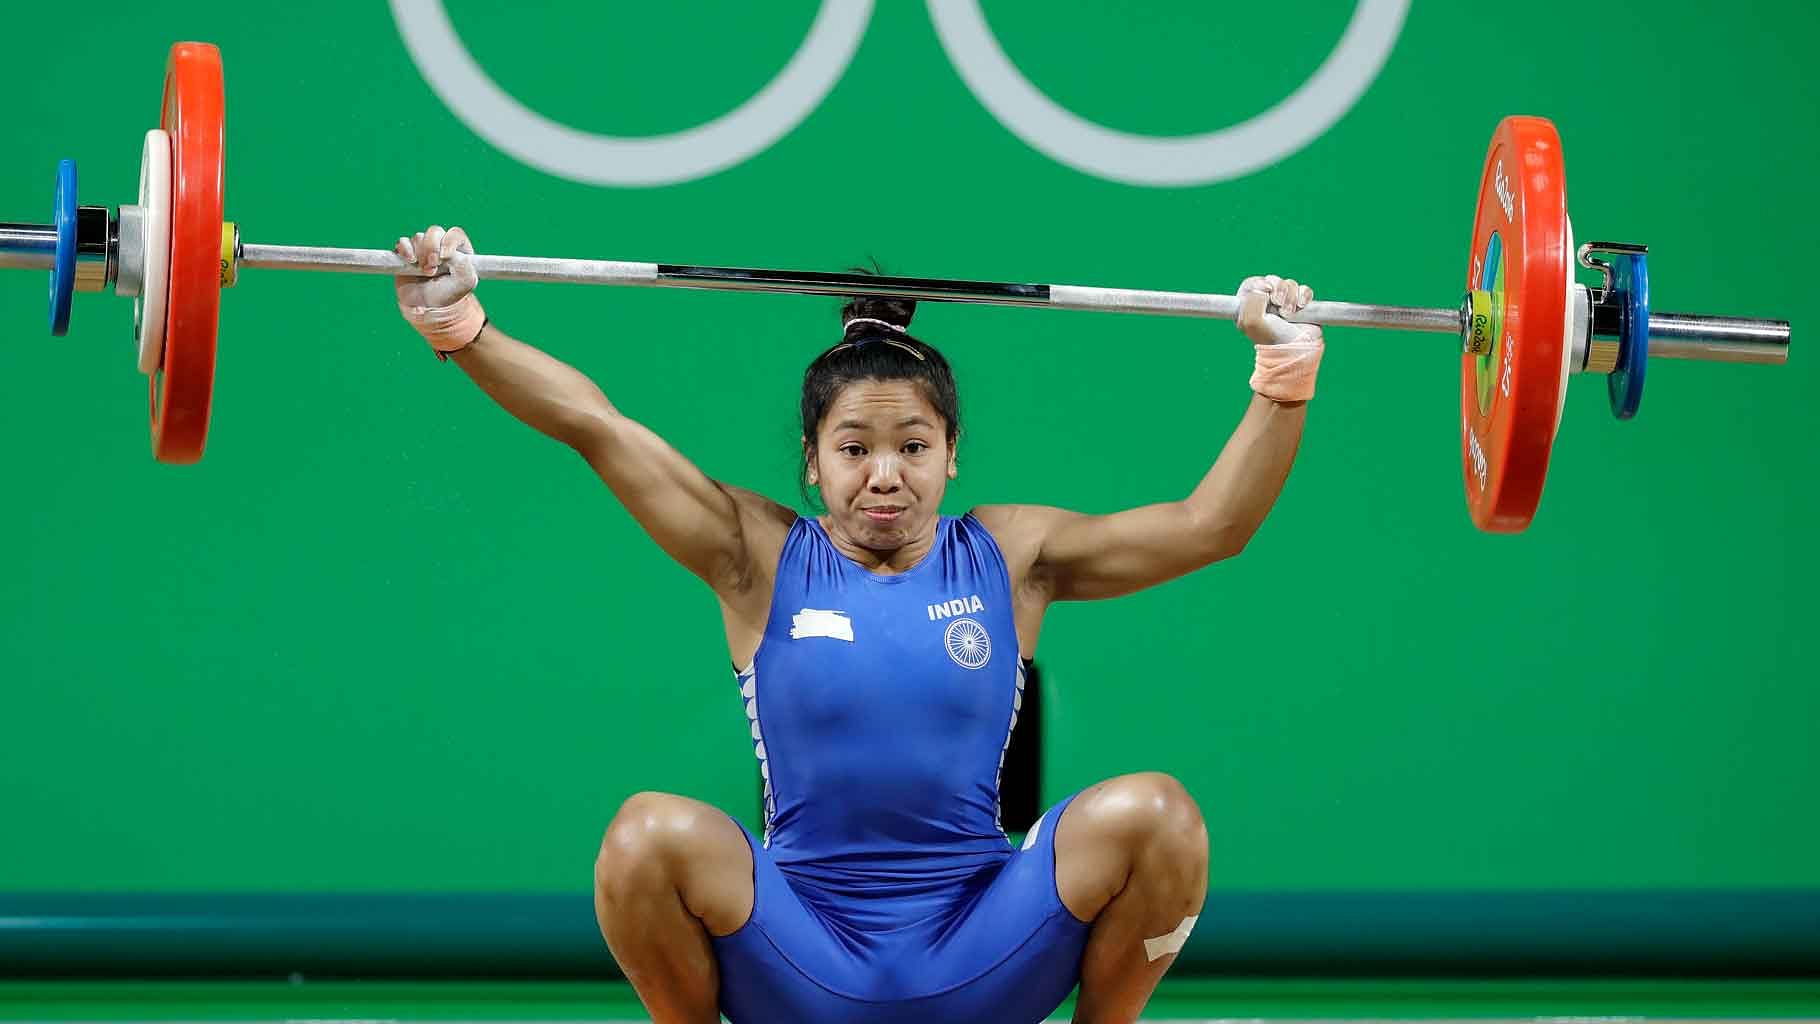 Mirabai Chanu on 30 November became the first Indian in over two decades to claim a gold medal at the World Weightlifting Championship.